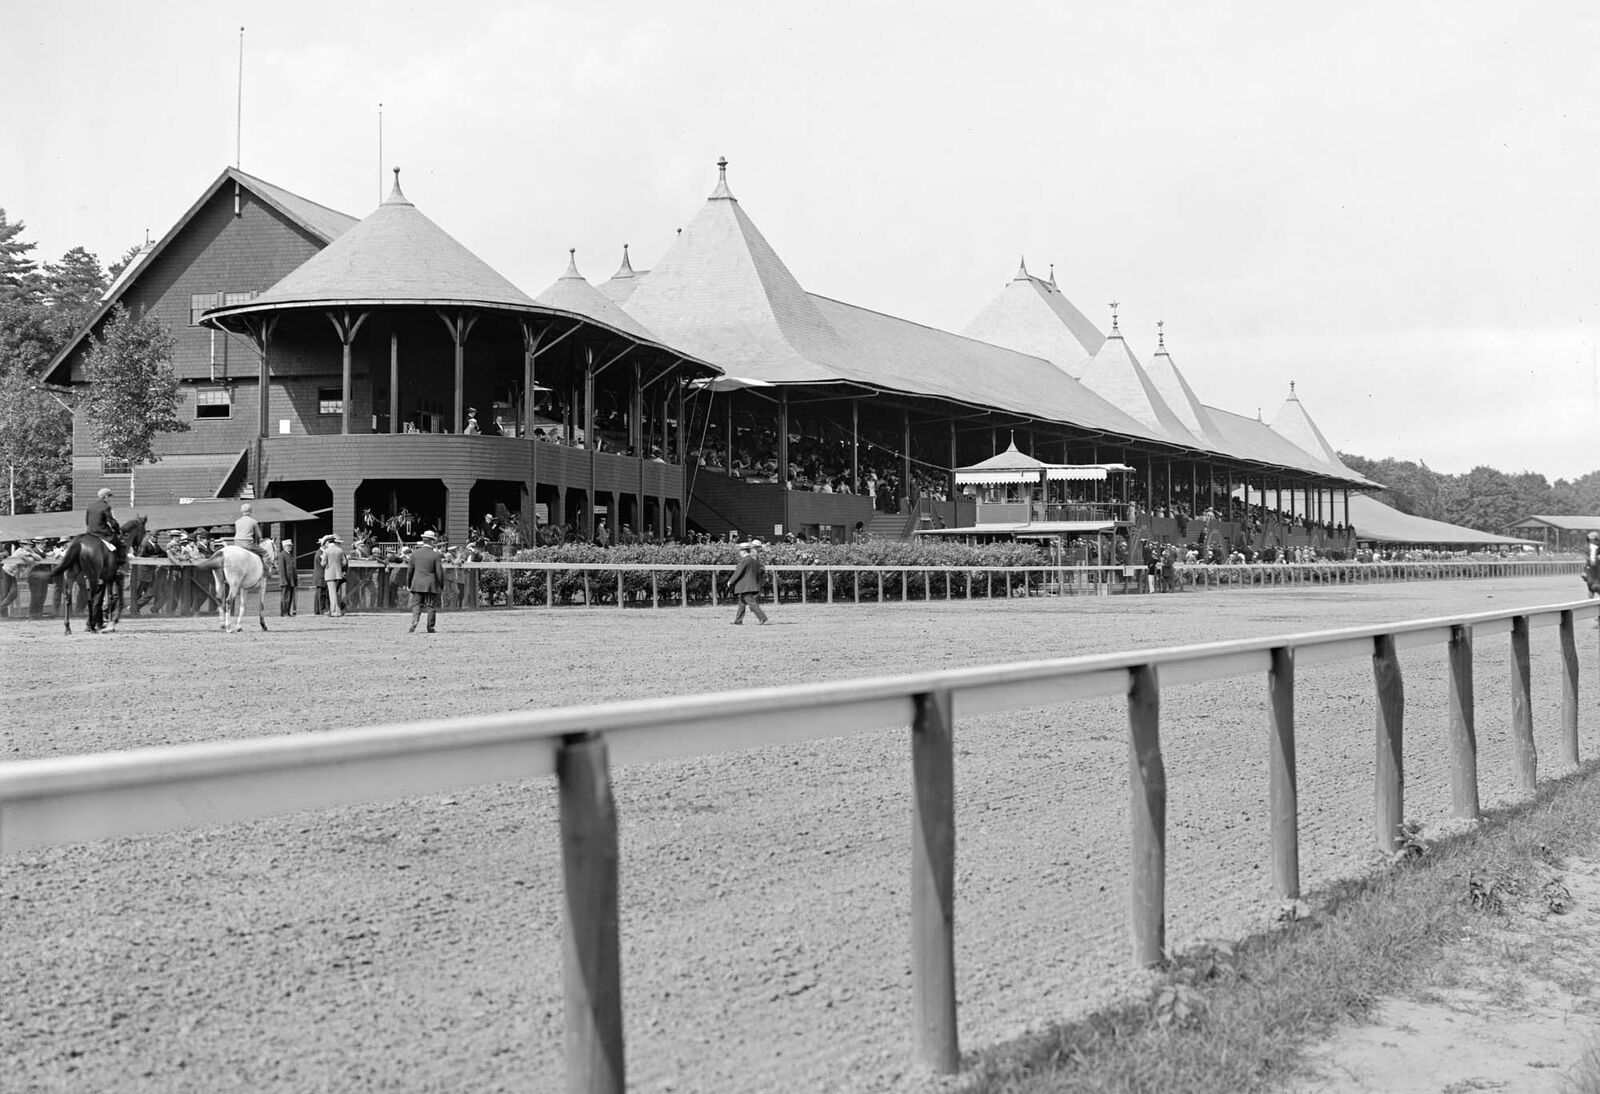 1900-1910 Saratoga Race Track and Grandstands, NY Old Photo 13